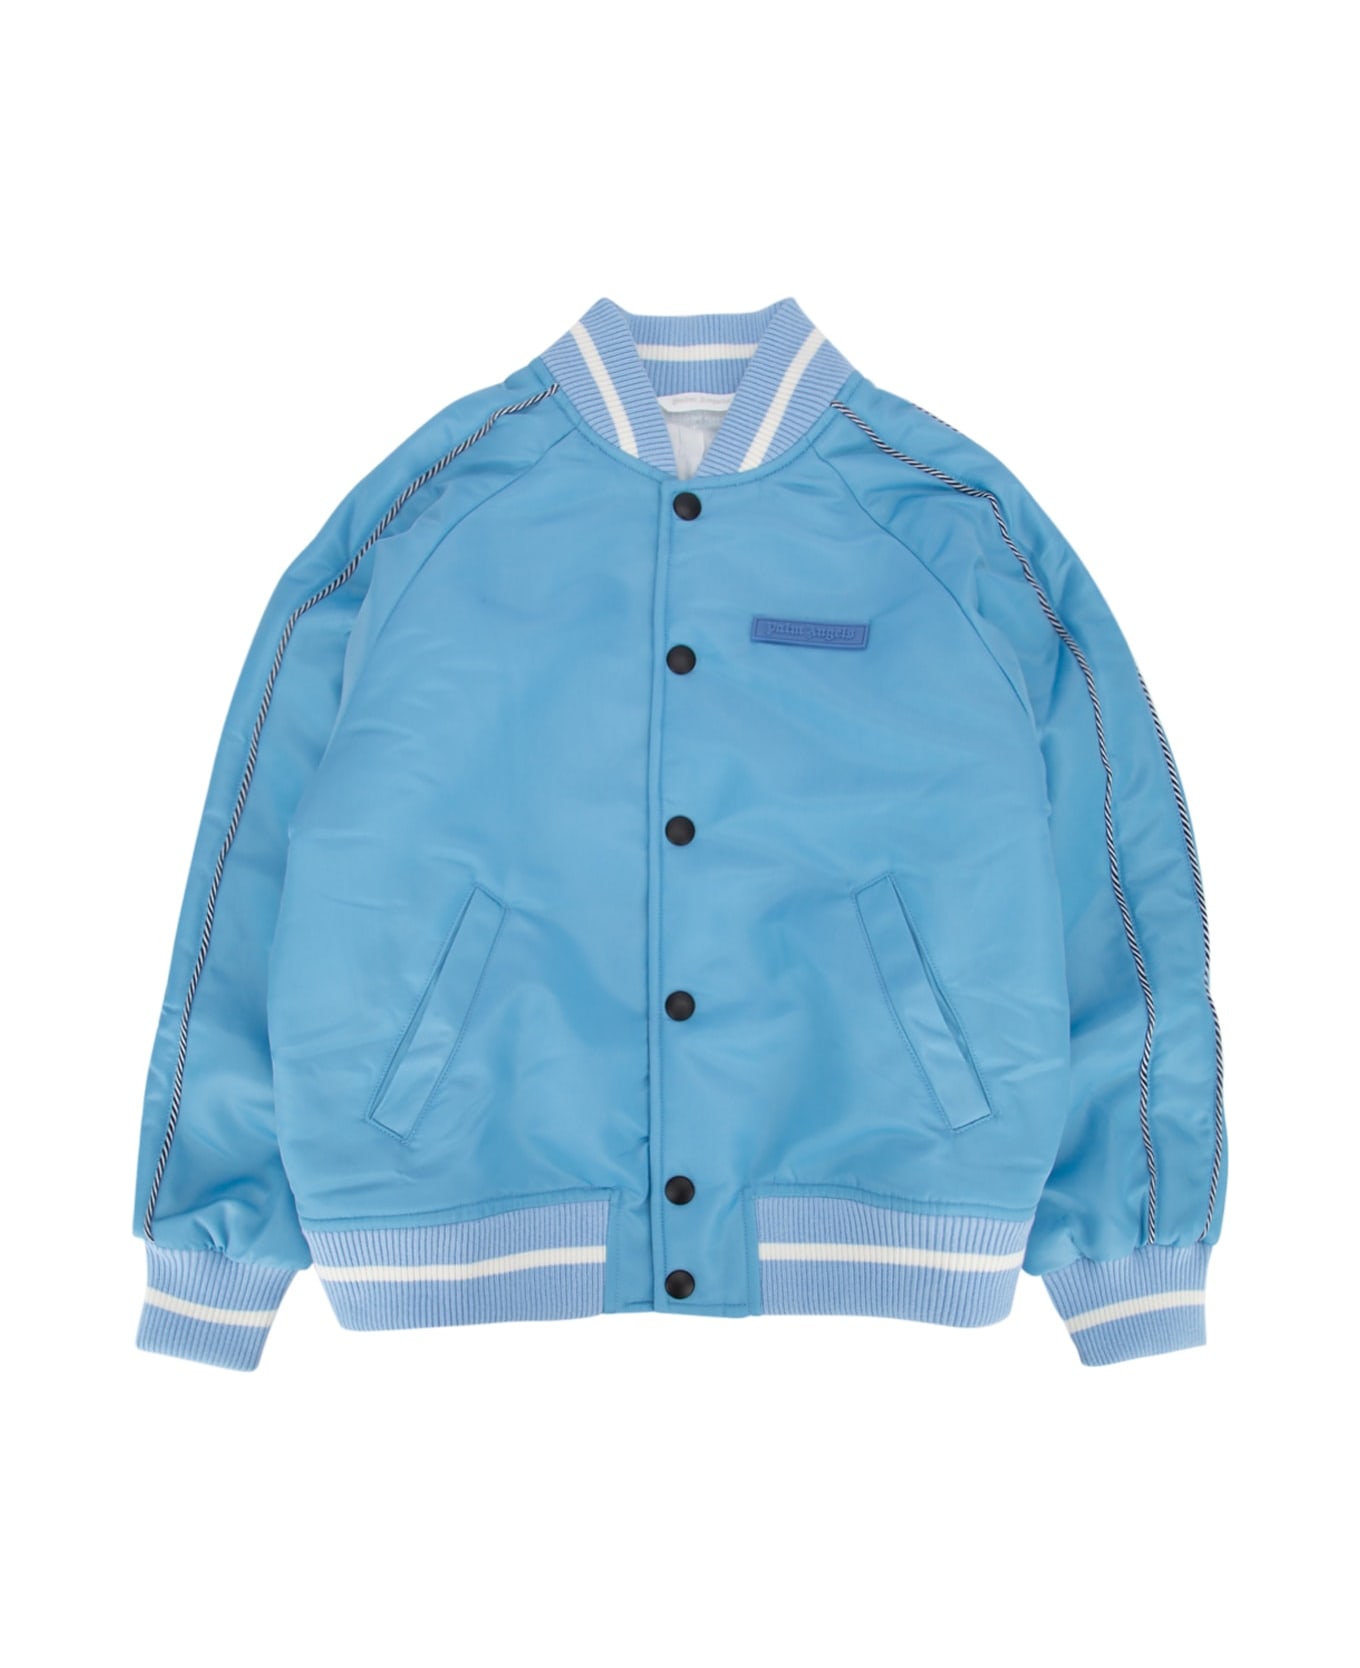 Palm Angels Cappotto - LIGHTBLUERED